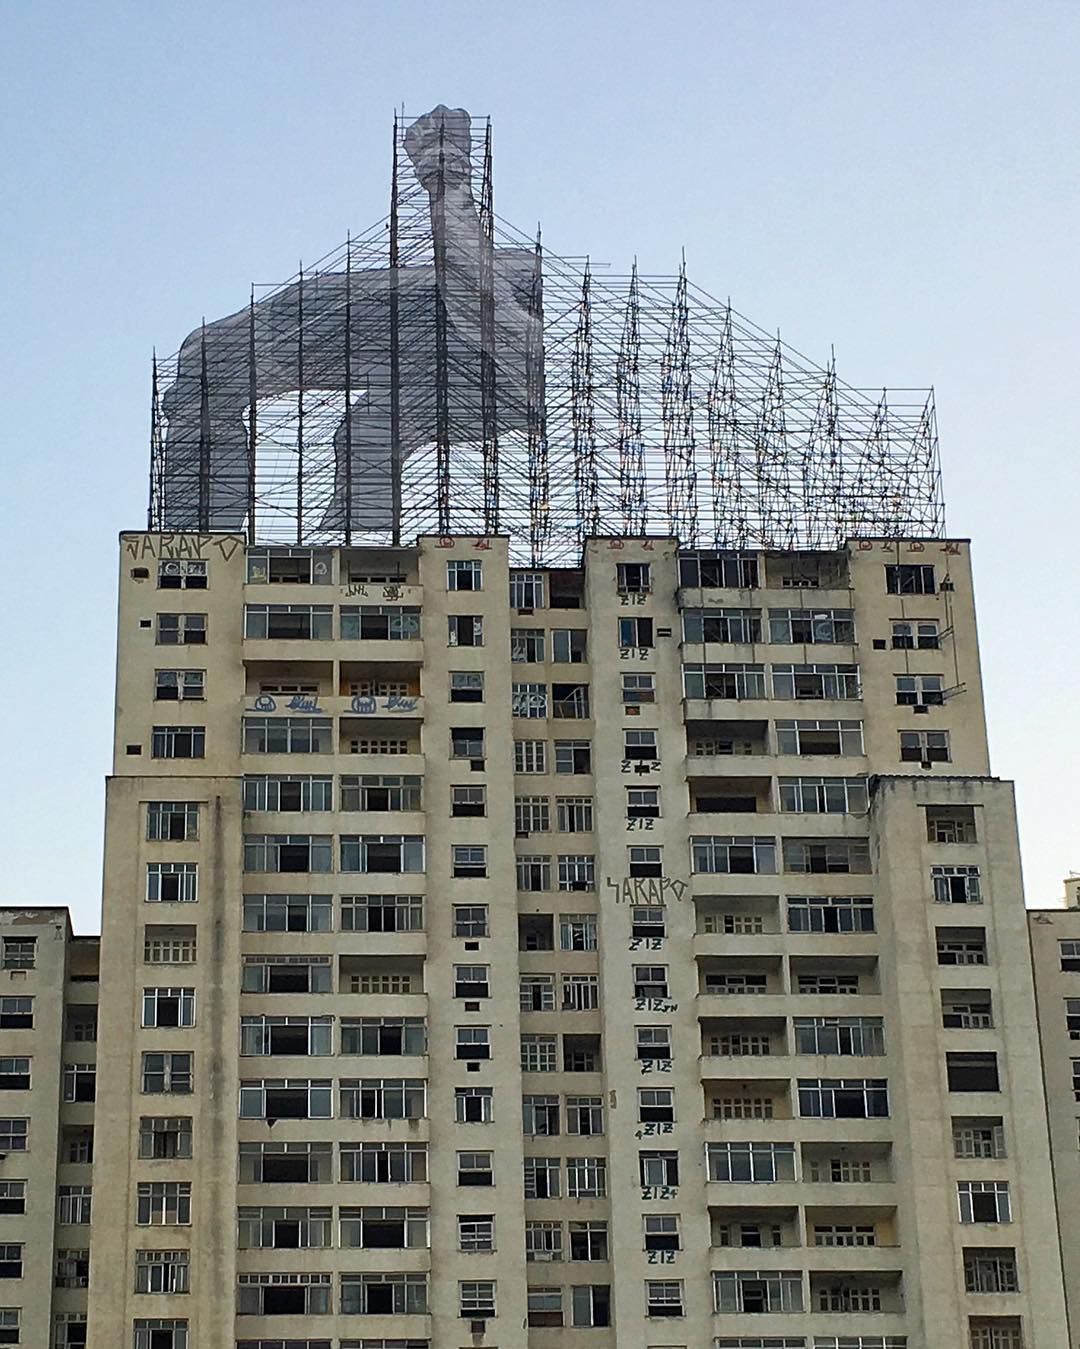 JR and his team install a new piece in Rio. Image courtesy of the artist's Instagram